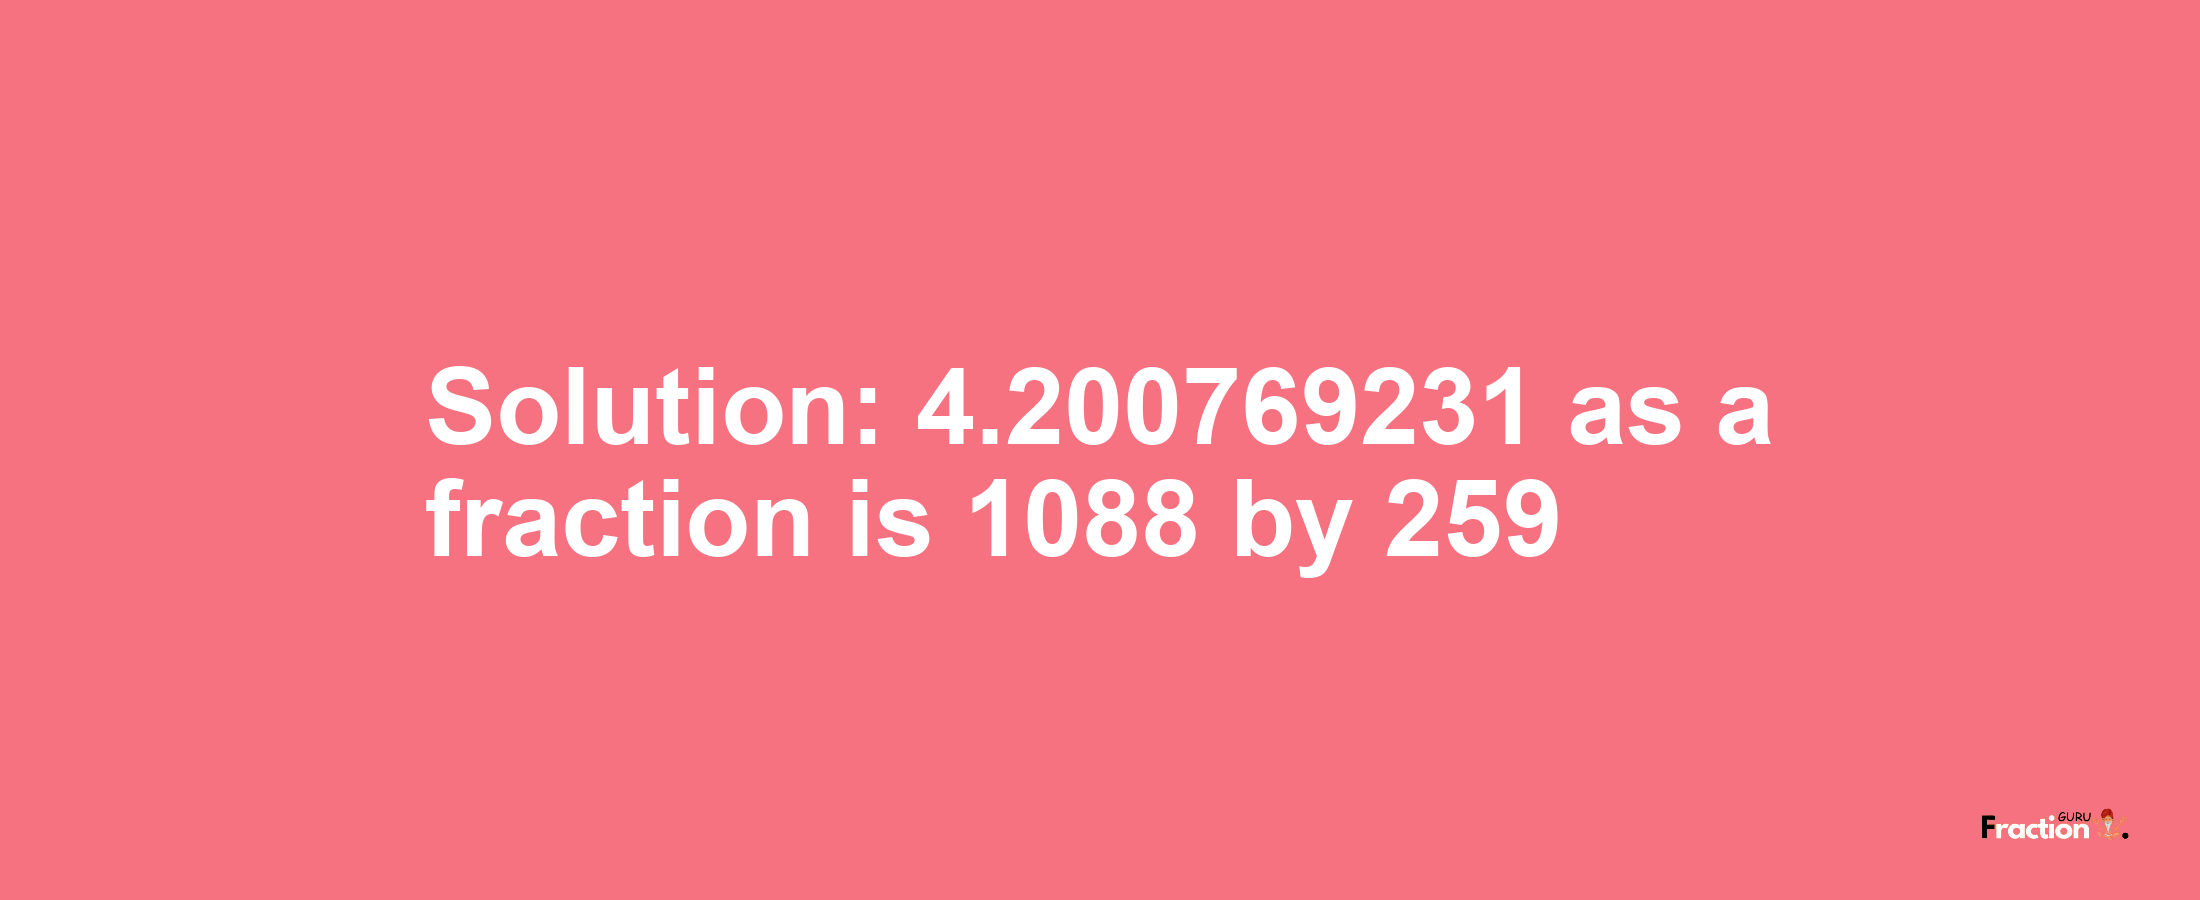 Solution:4.200769231 as a fraction is 1088/259